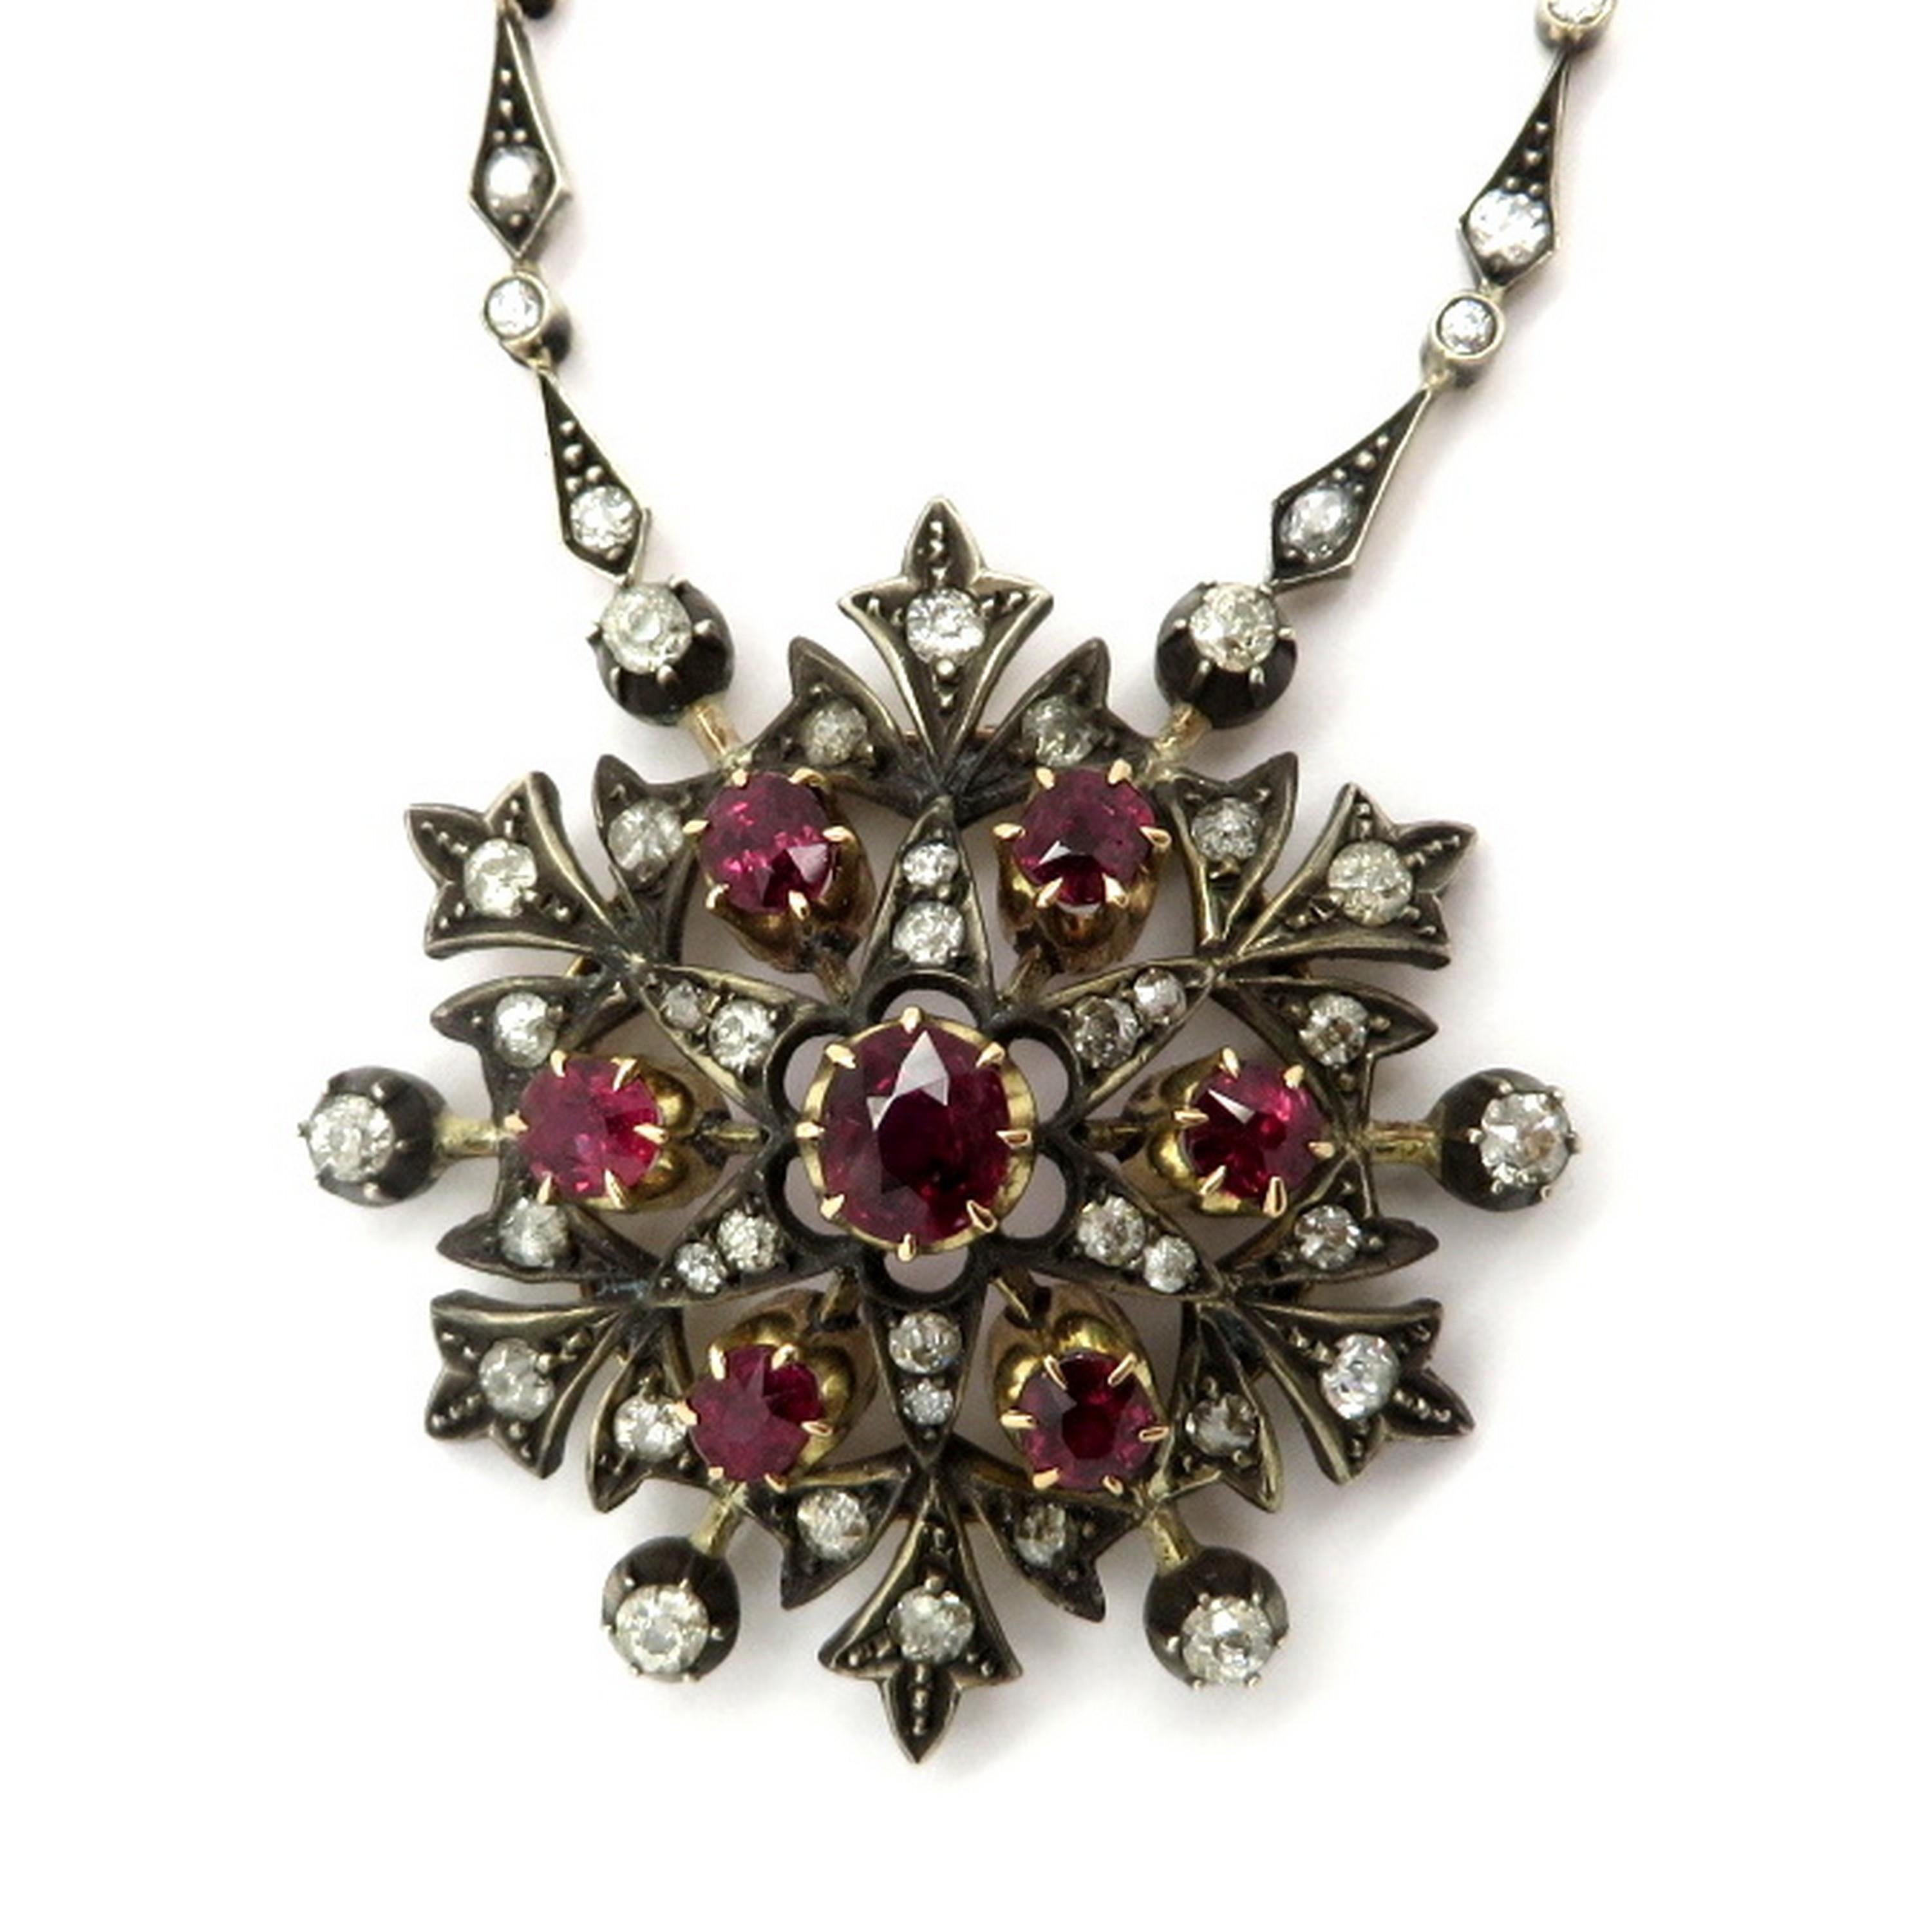 Victorian style silver and 18K yellow gold floral ruby and diamond necklace. Showcasing seven round and oval shaped fine quality natural rubies weighing a combined total of approximately 4.50 carats. Interspersed with numerous Old Mine cut bead,